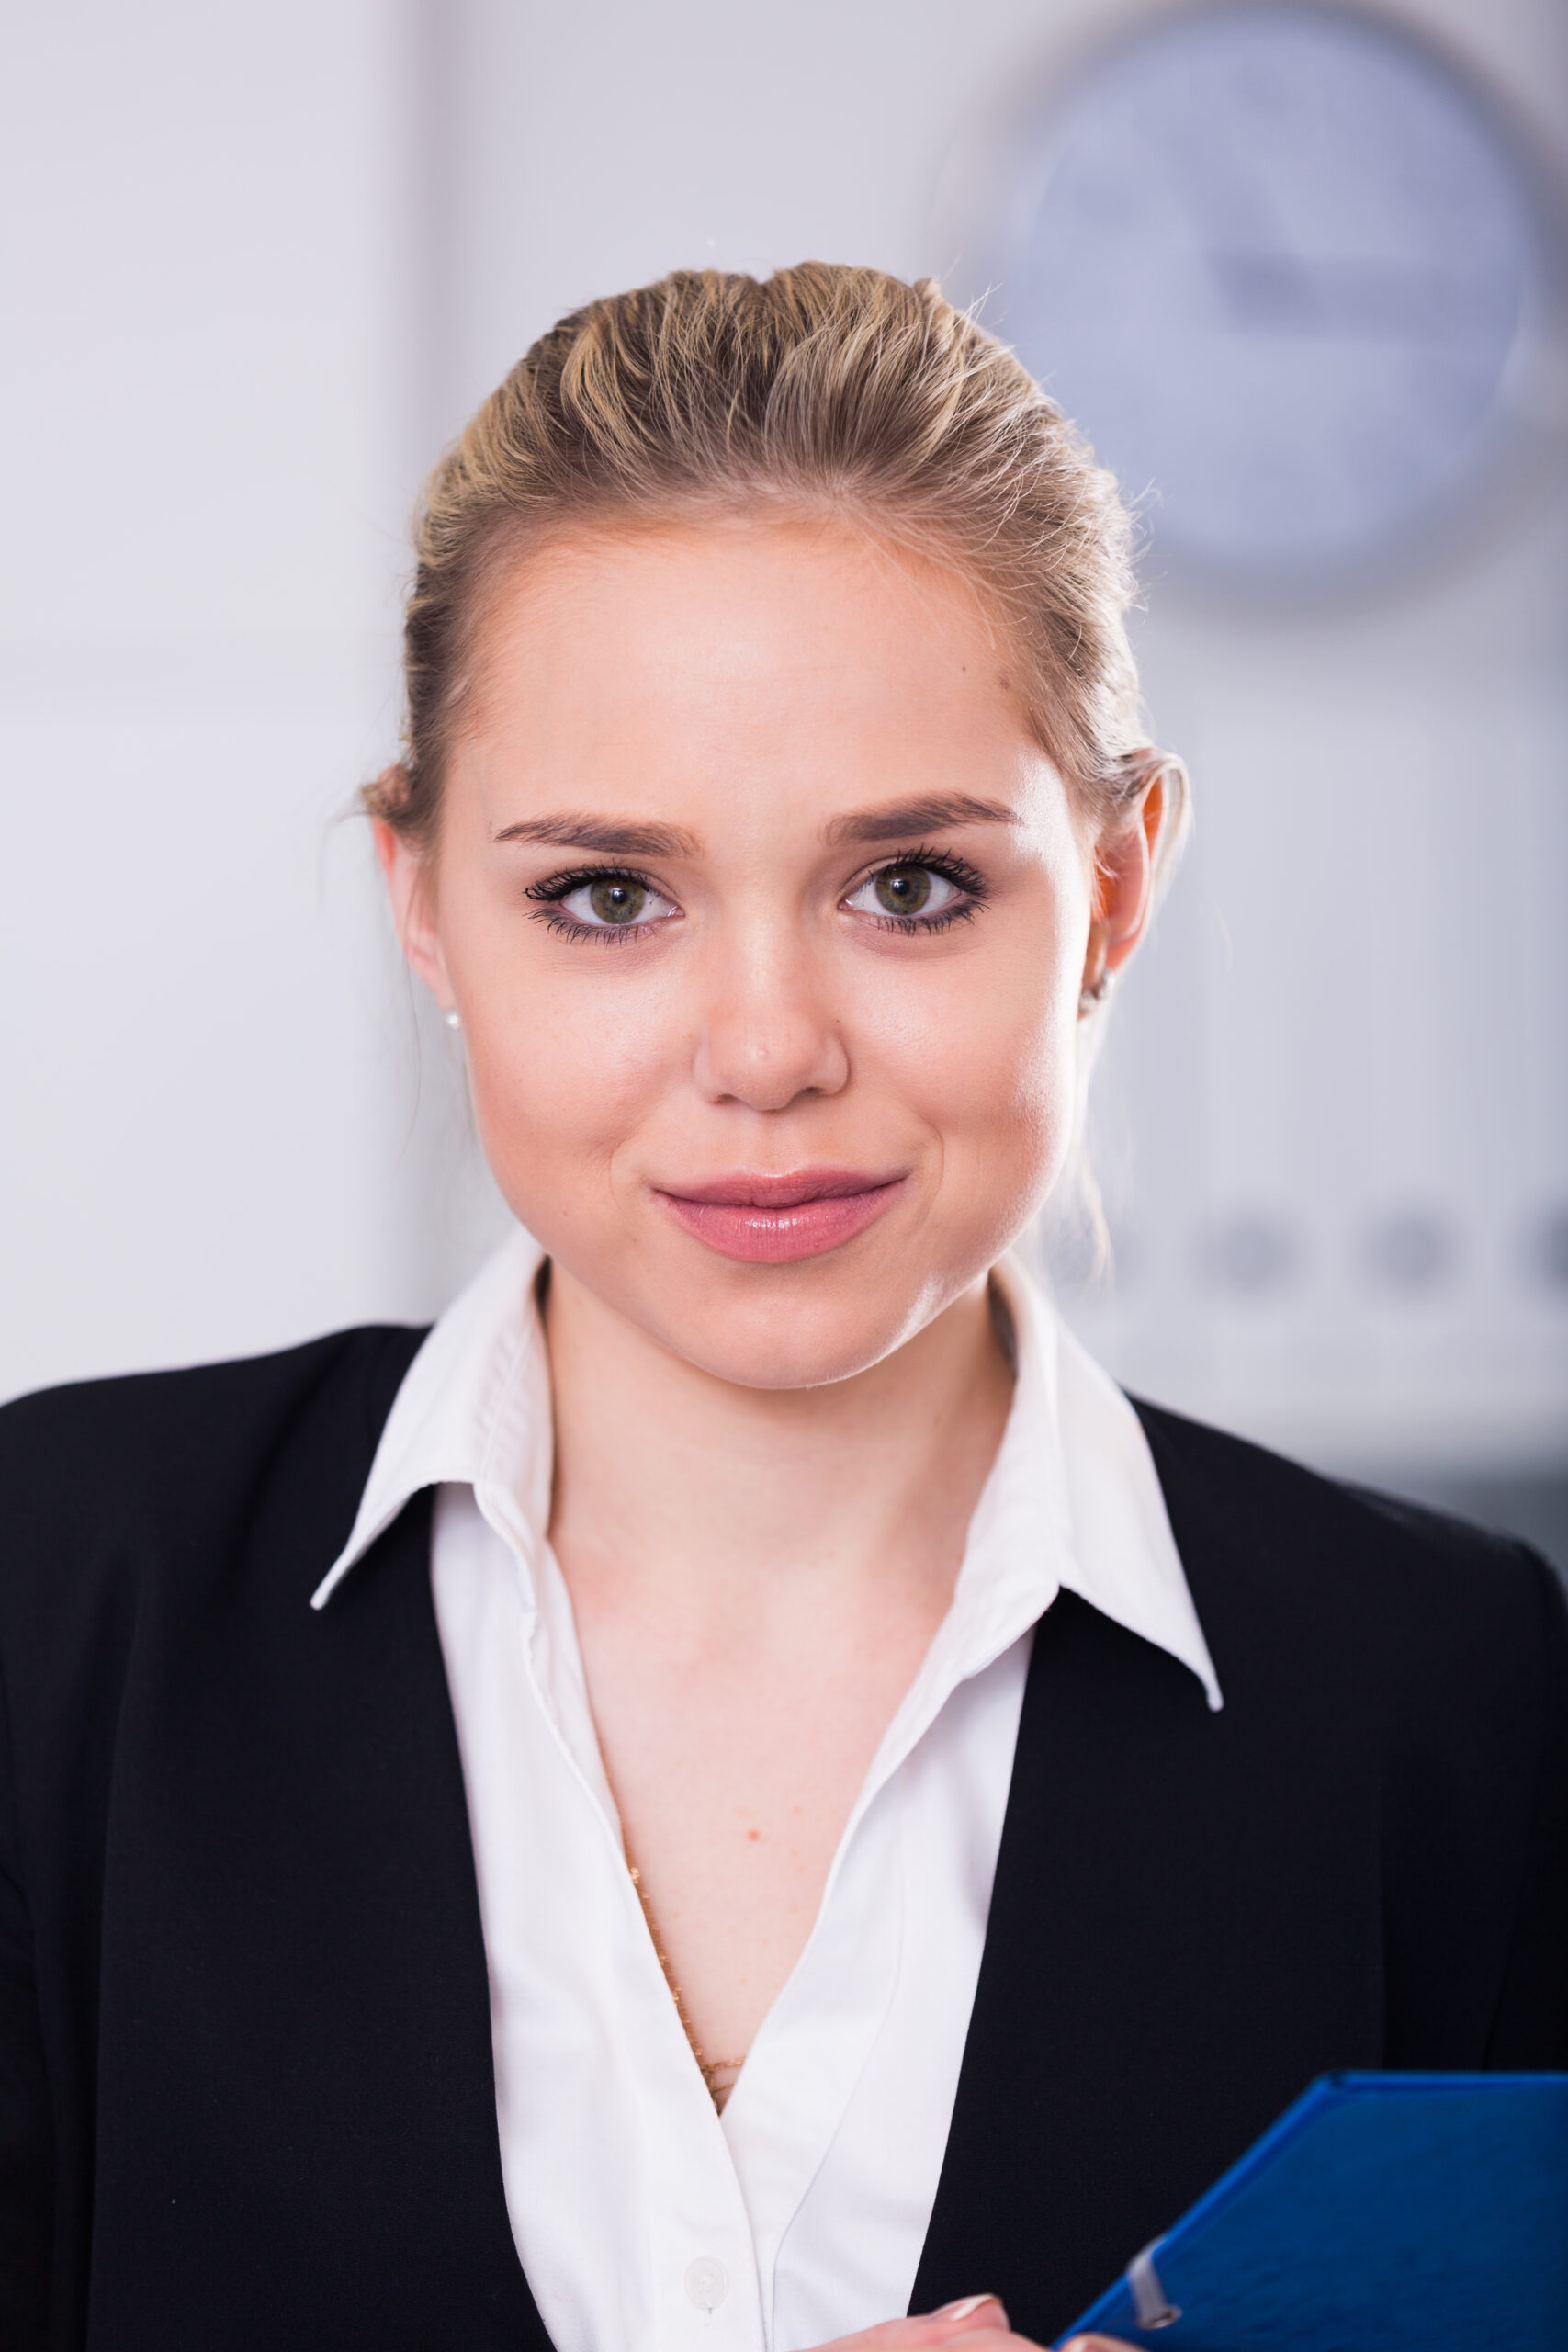 Free photo portrait of business woman in office